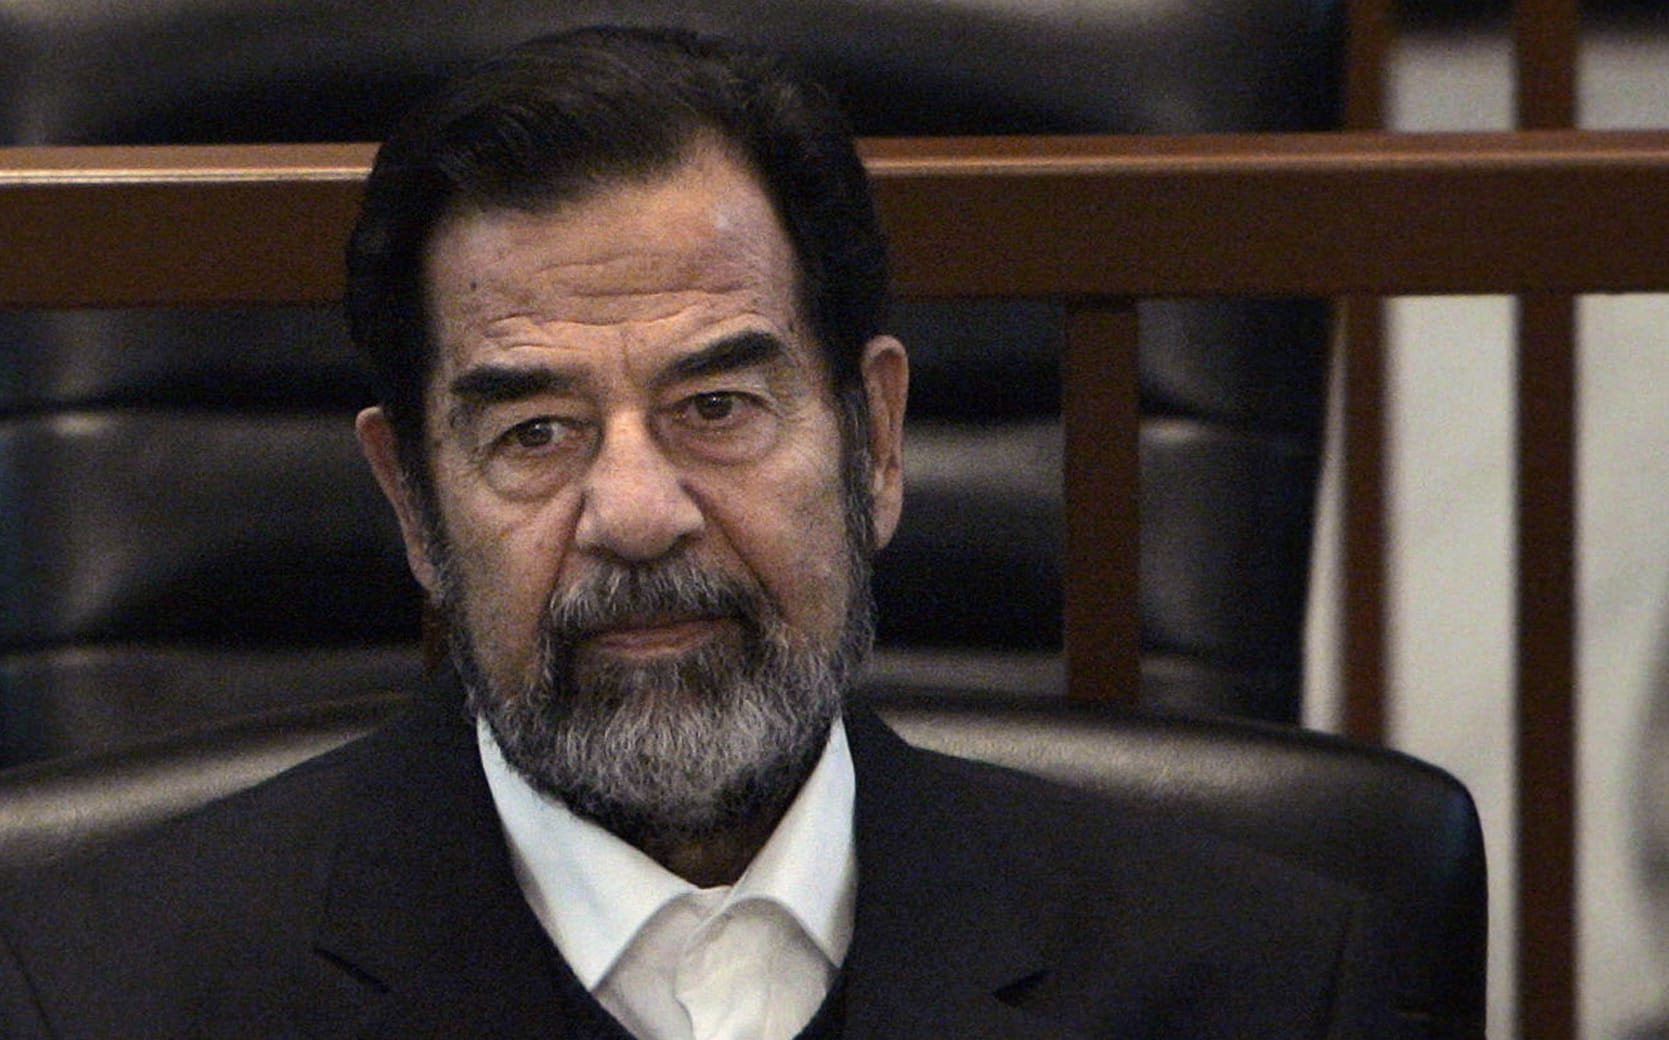 Saddam Hussein at his 2006 trial.